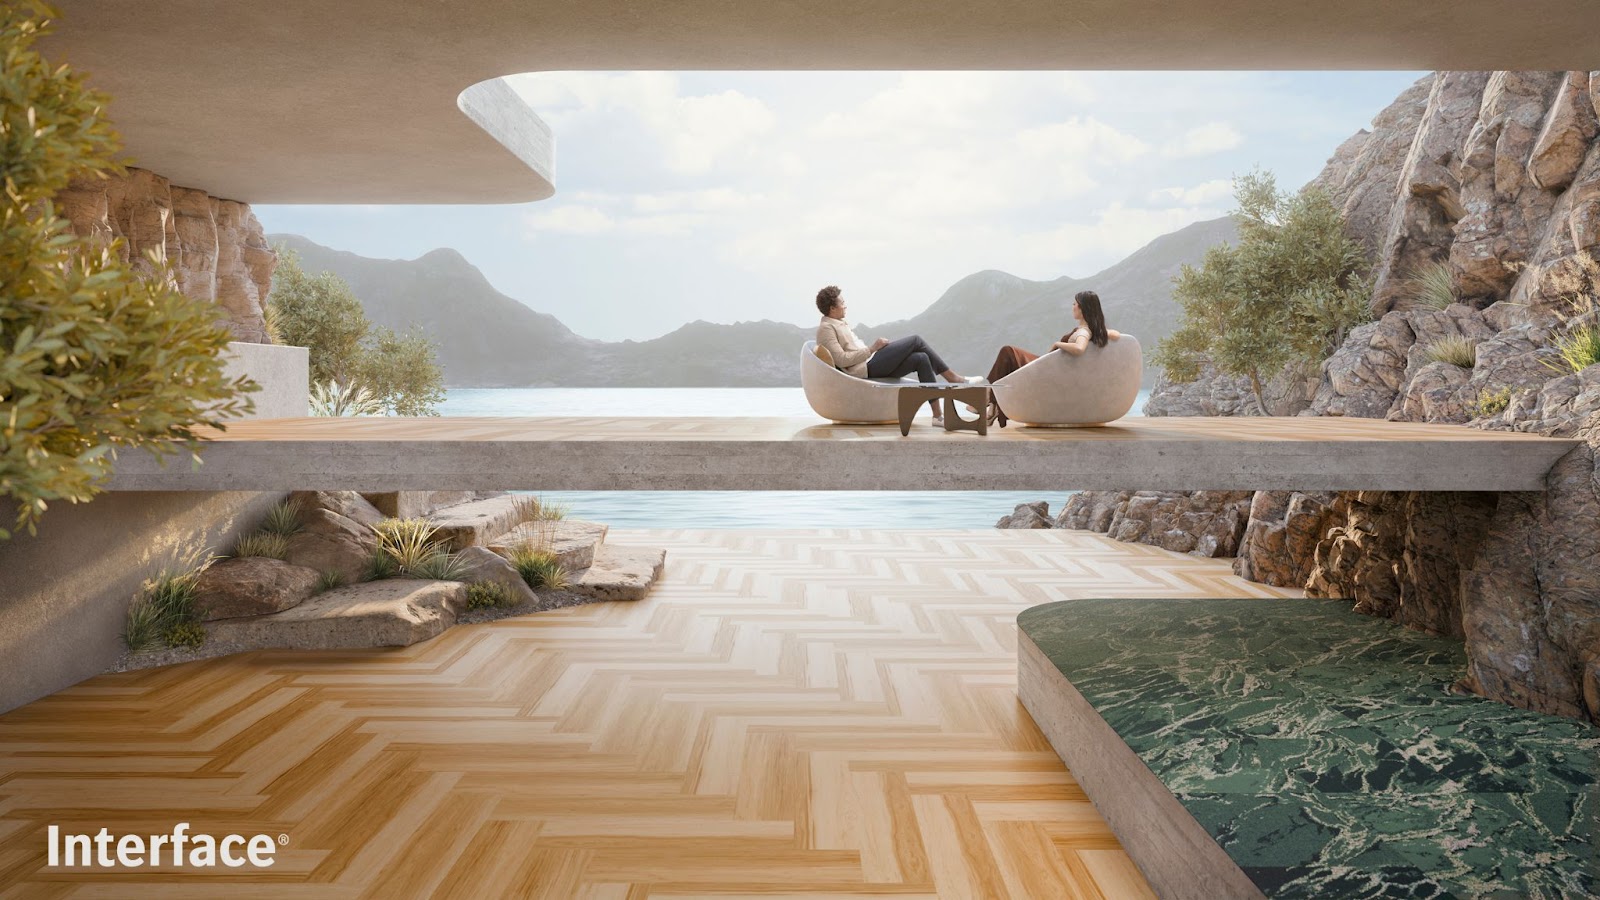 CGI enhanced advertising photo for flooring company, with two seated figures in lofted futurist modern sitting balcony, overlooking lakeside mountainscape, herringbone-pattern wood flooring in foreground, by Pamplona-based photographer Mikel Muruzabal. 